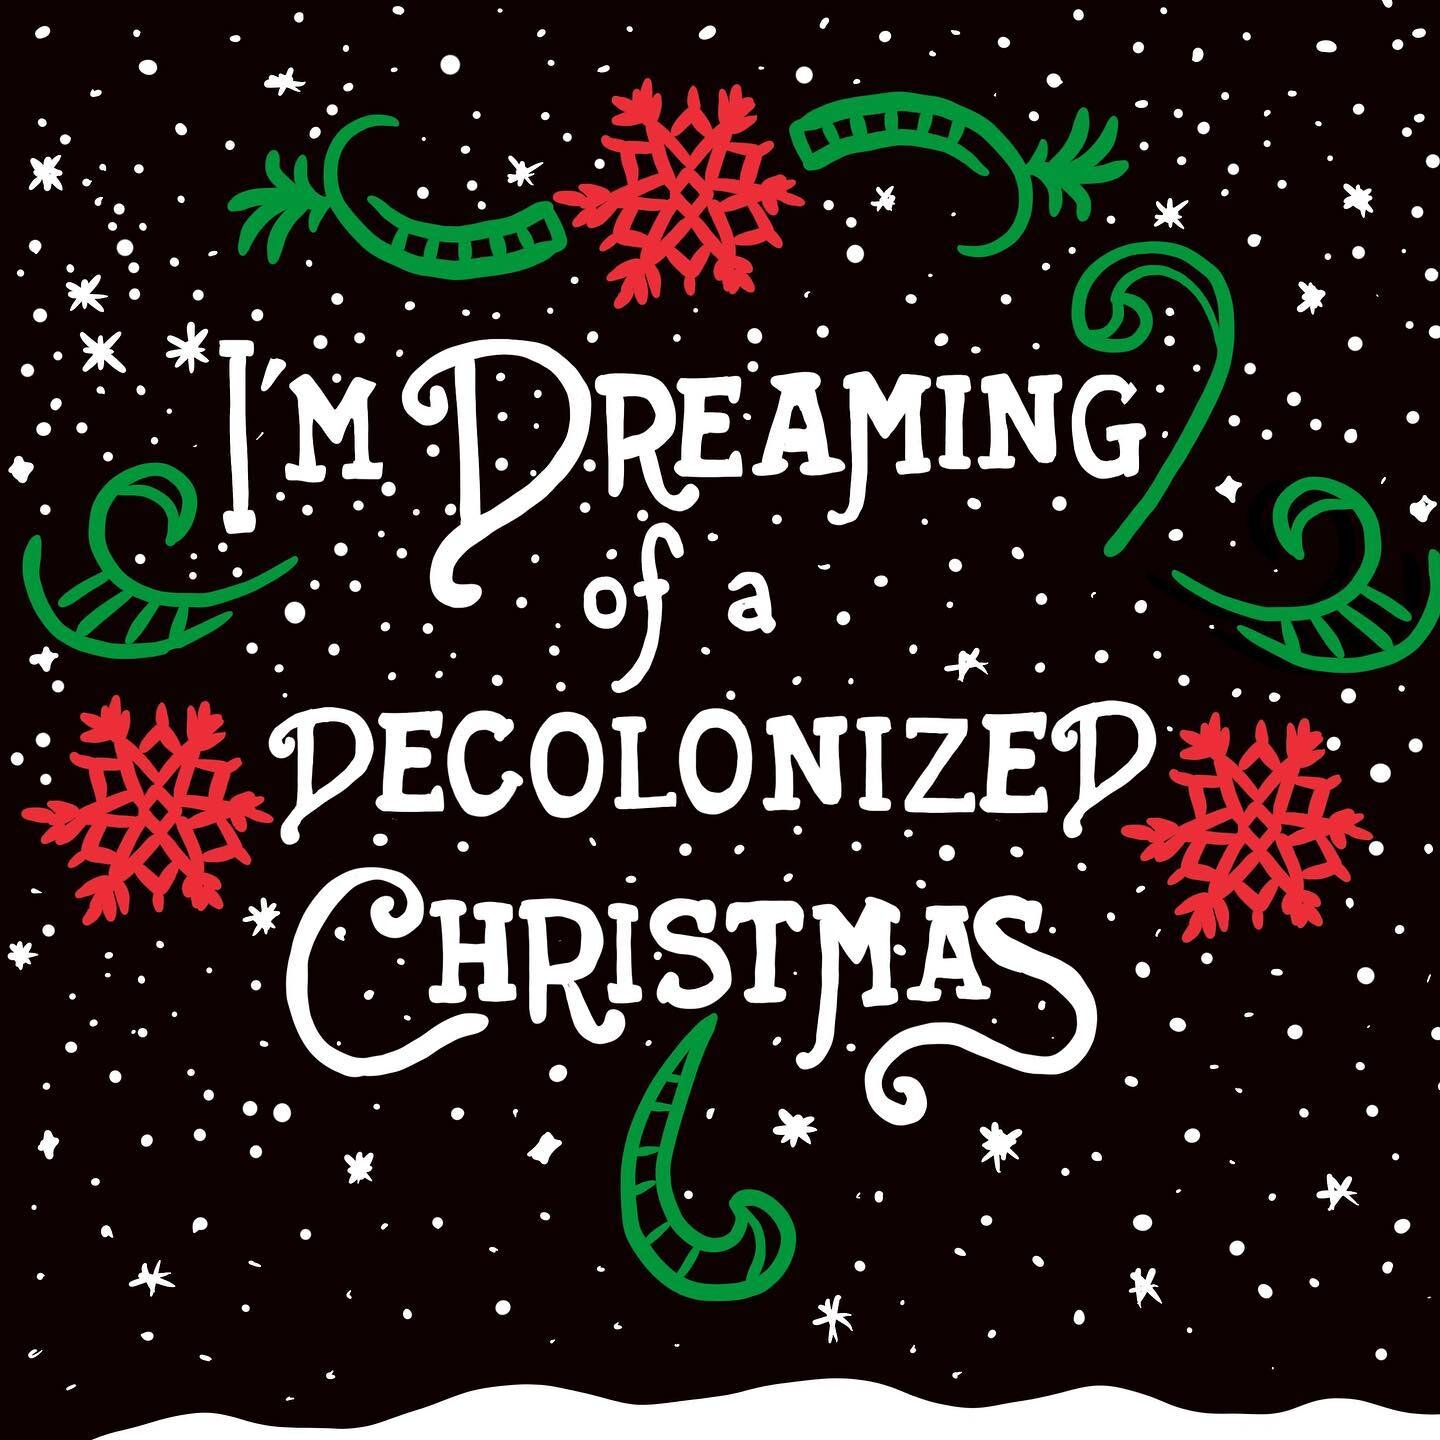 &hearts;️🤍💚🖤 Dreaming of a decolonized Christmas where the echoes of colonialism no longer fuel crises.

For me, a decolonized Christmas means celebrating each other&rsquo;s uniqueness and belief systems, fostering a world where diversity isn&rsqu